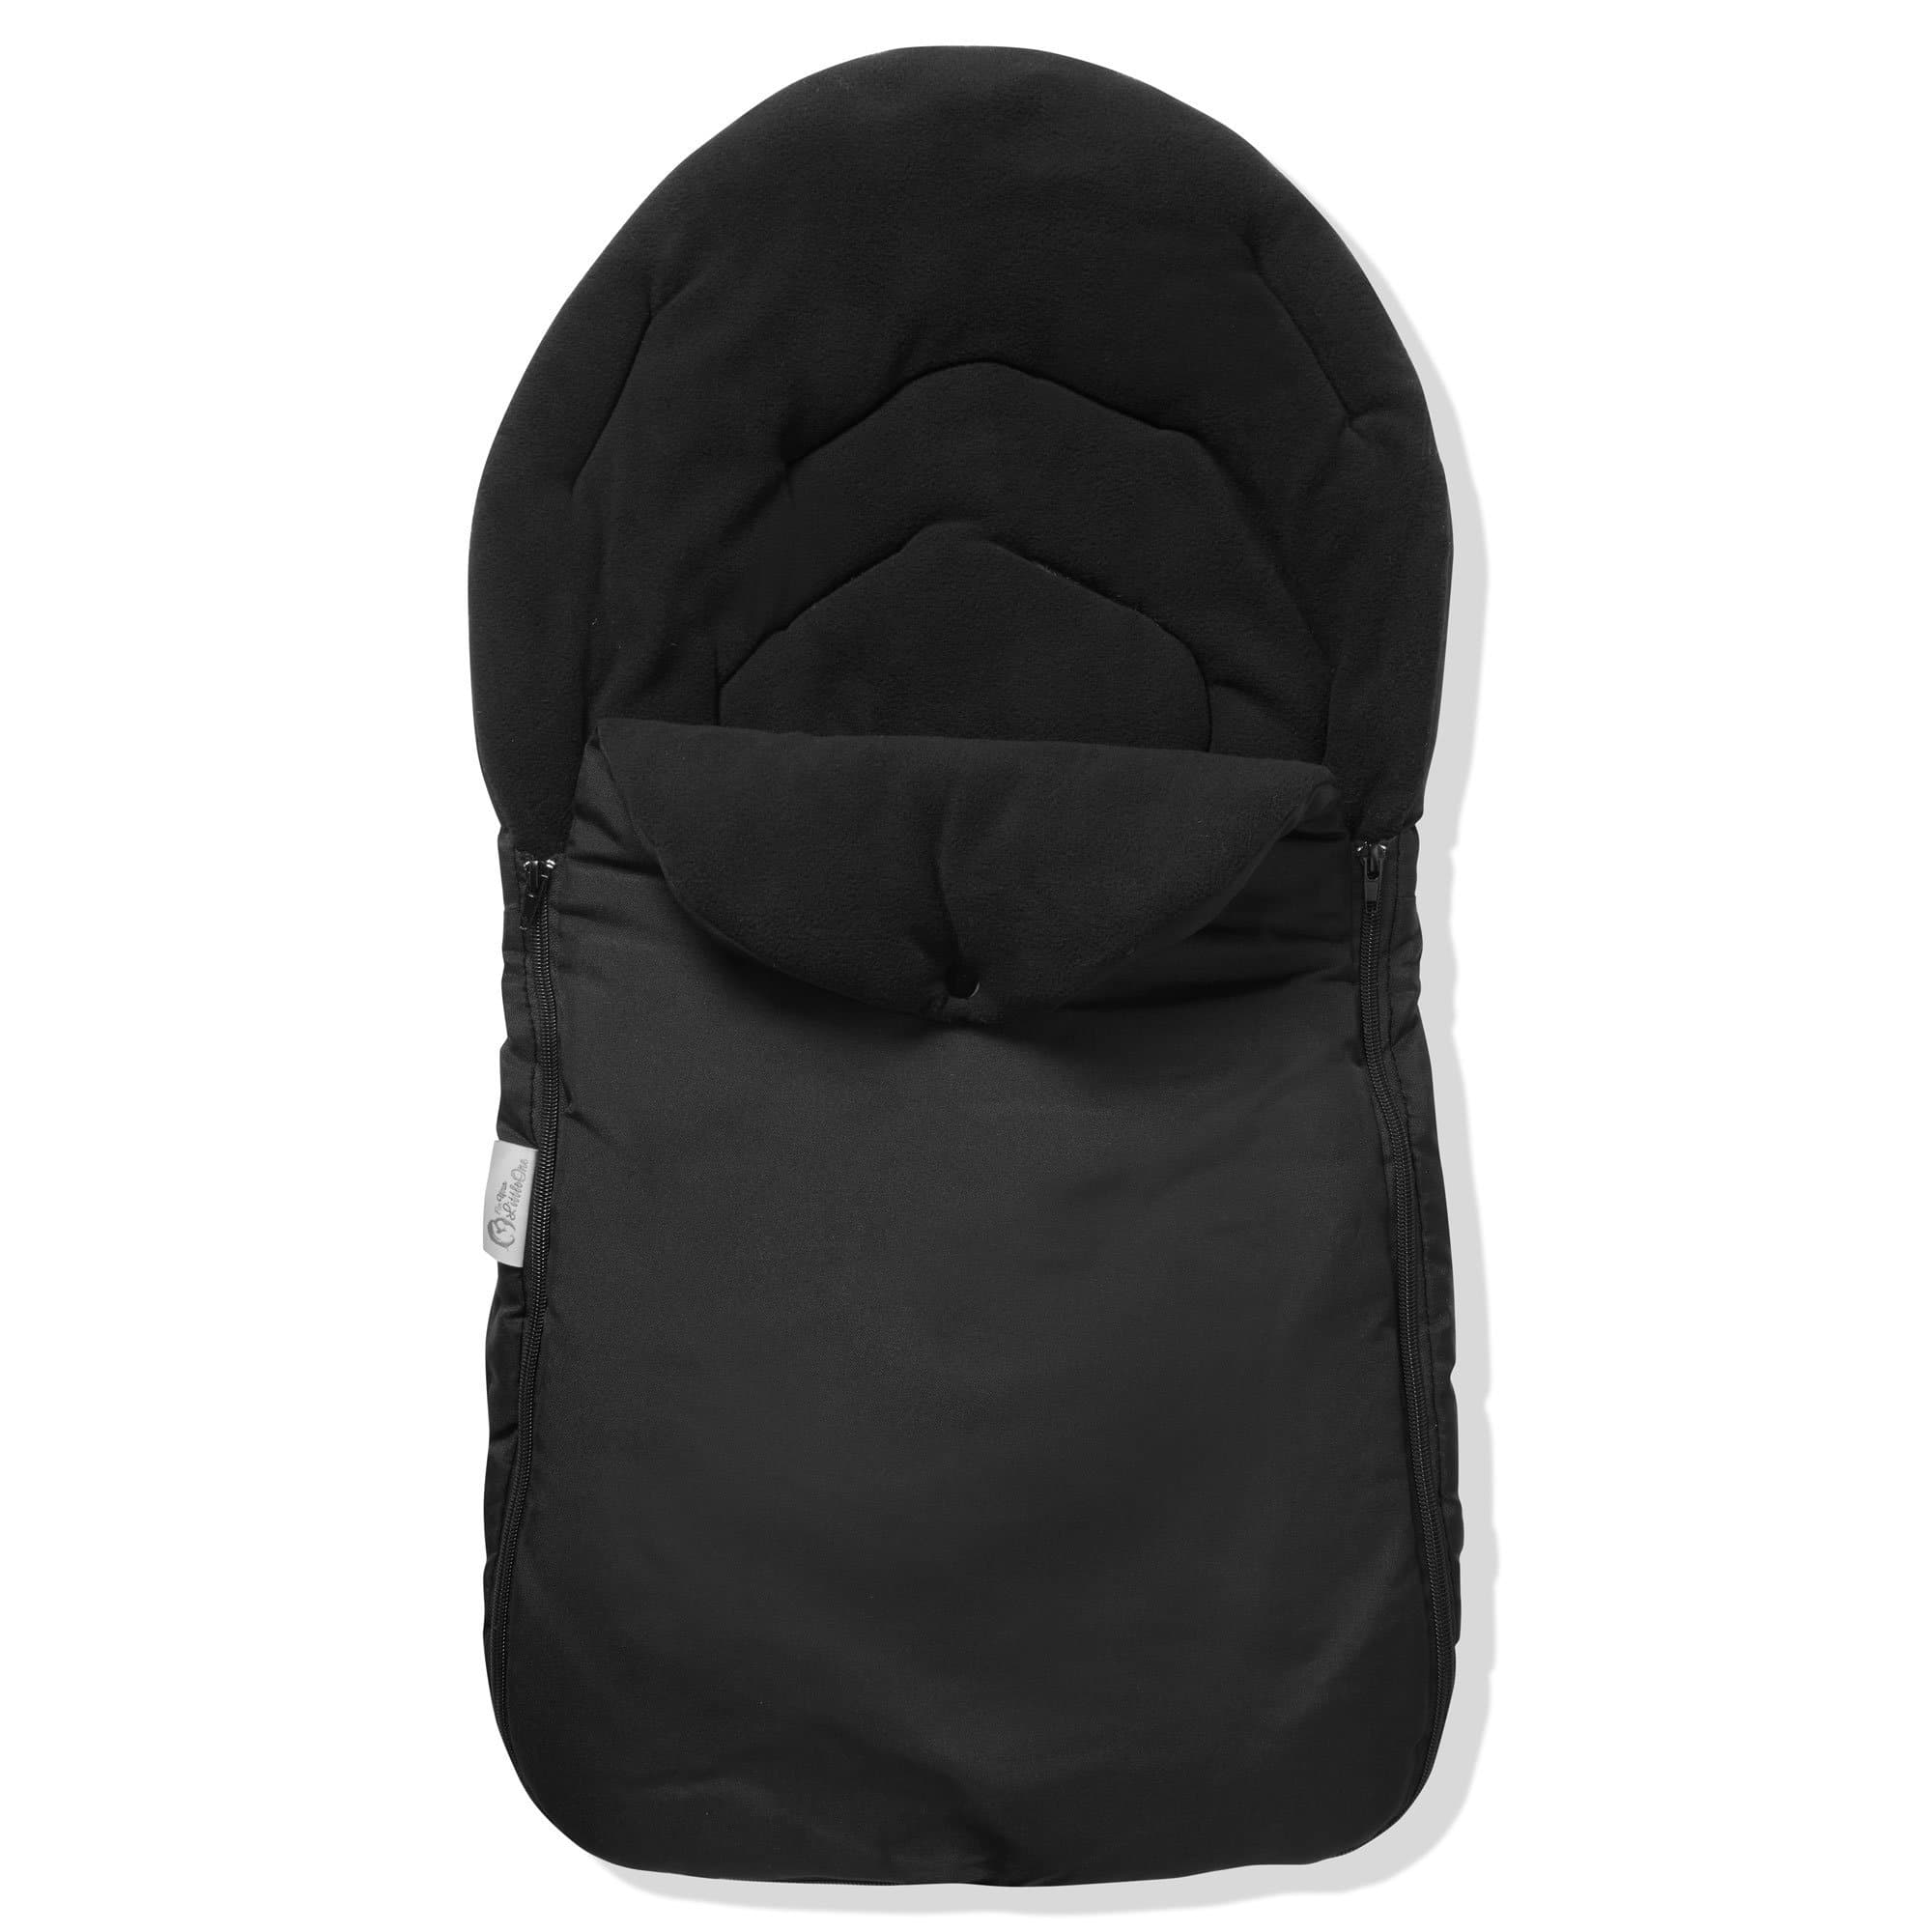 Car Seat Footmuff / Cosy Toes Compatible with Hauck - Black / Fits All Models | For Your Little One